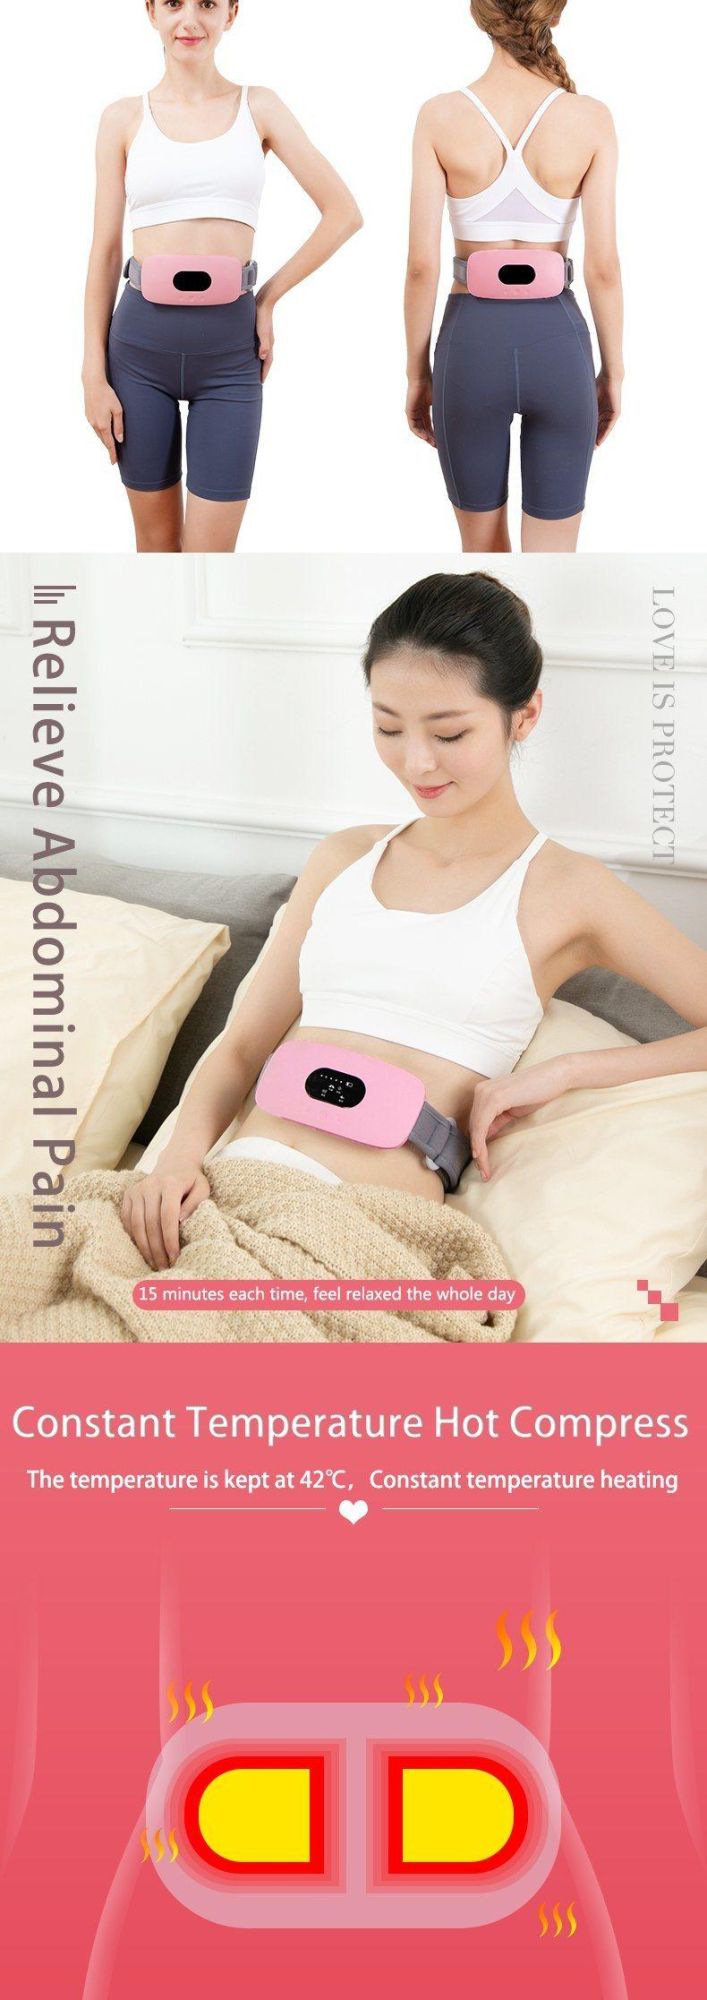 Hezheng Belly Beauty Massager Products Thermal Heating Electric Waist Slimming Belt Fit Massage Belt